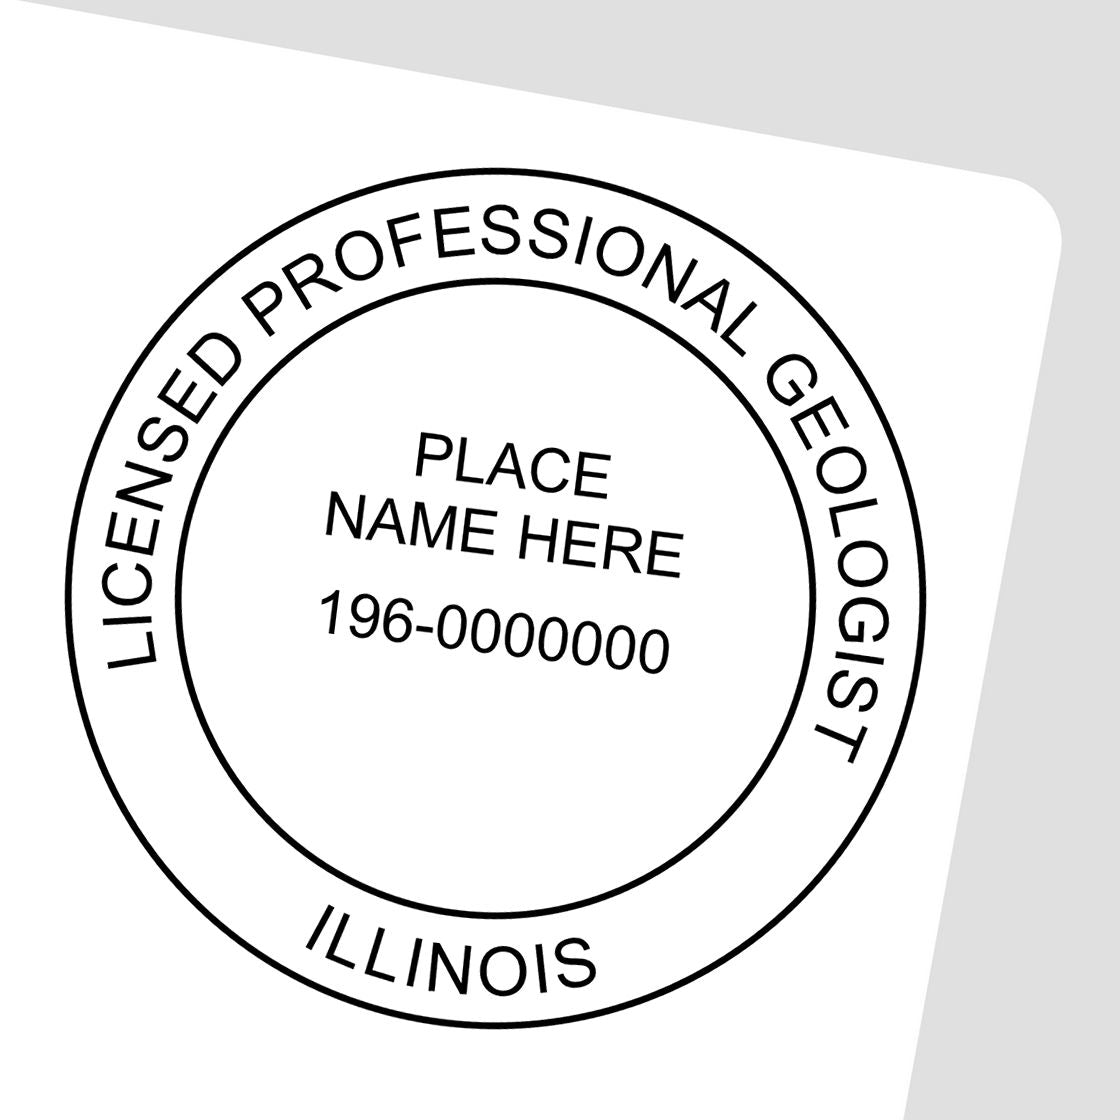 This paper is stamped with a sample imprint of the Premium MaxLight Pre-Inked Illinois Geology Stamp, signifying its quality and reliability.